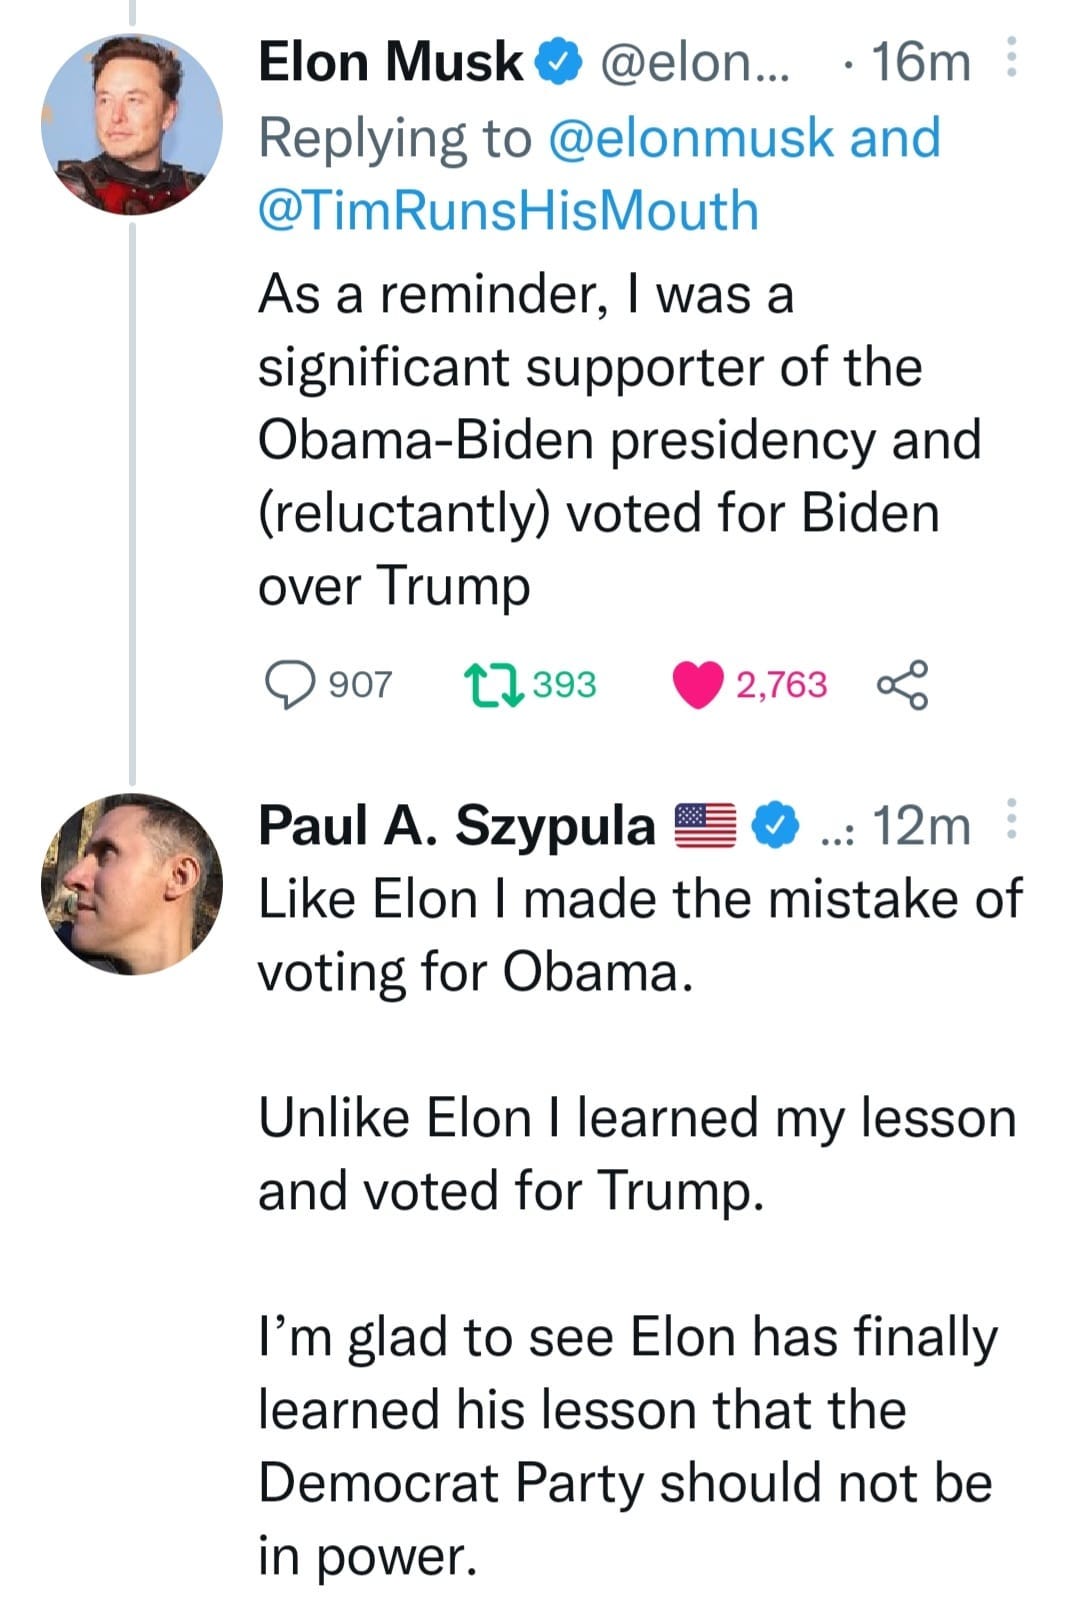 May be a Twitter screenshot of 2 people and text that says 'Elon Musk @elon... 16m Replying to @elonmusk and @TimRunsHisMouth As a reminder, was a significant supporter of the Obama-Biden presidency and (reluctantly) voted for Biden over Trump 907 393 2,763 Paul A. Szypula 12m Like Elon I made the mistake of voting for Obama. Unlike Elon learned my lesson and voted for Trump. I'm glad to see Elon has finally learned his lesson that the Democrat Party should not be in power.'